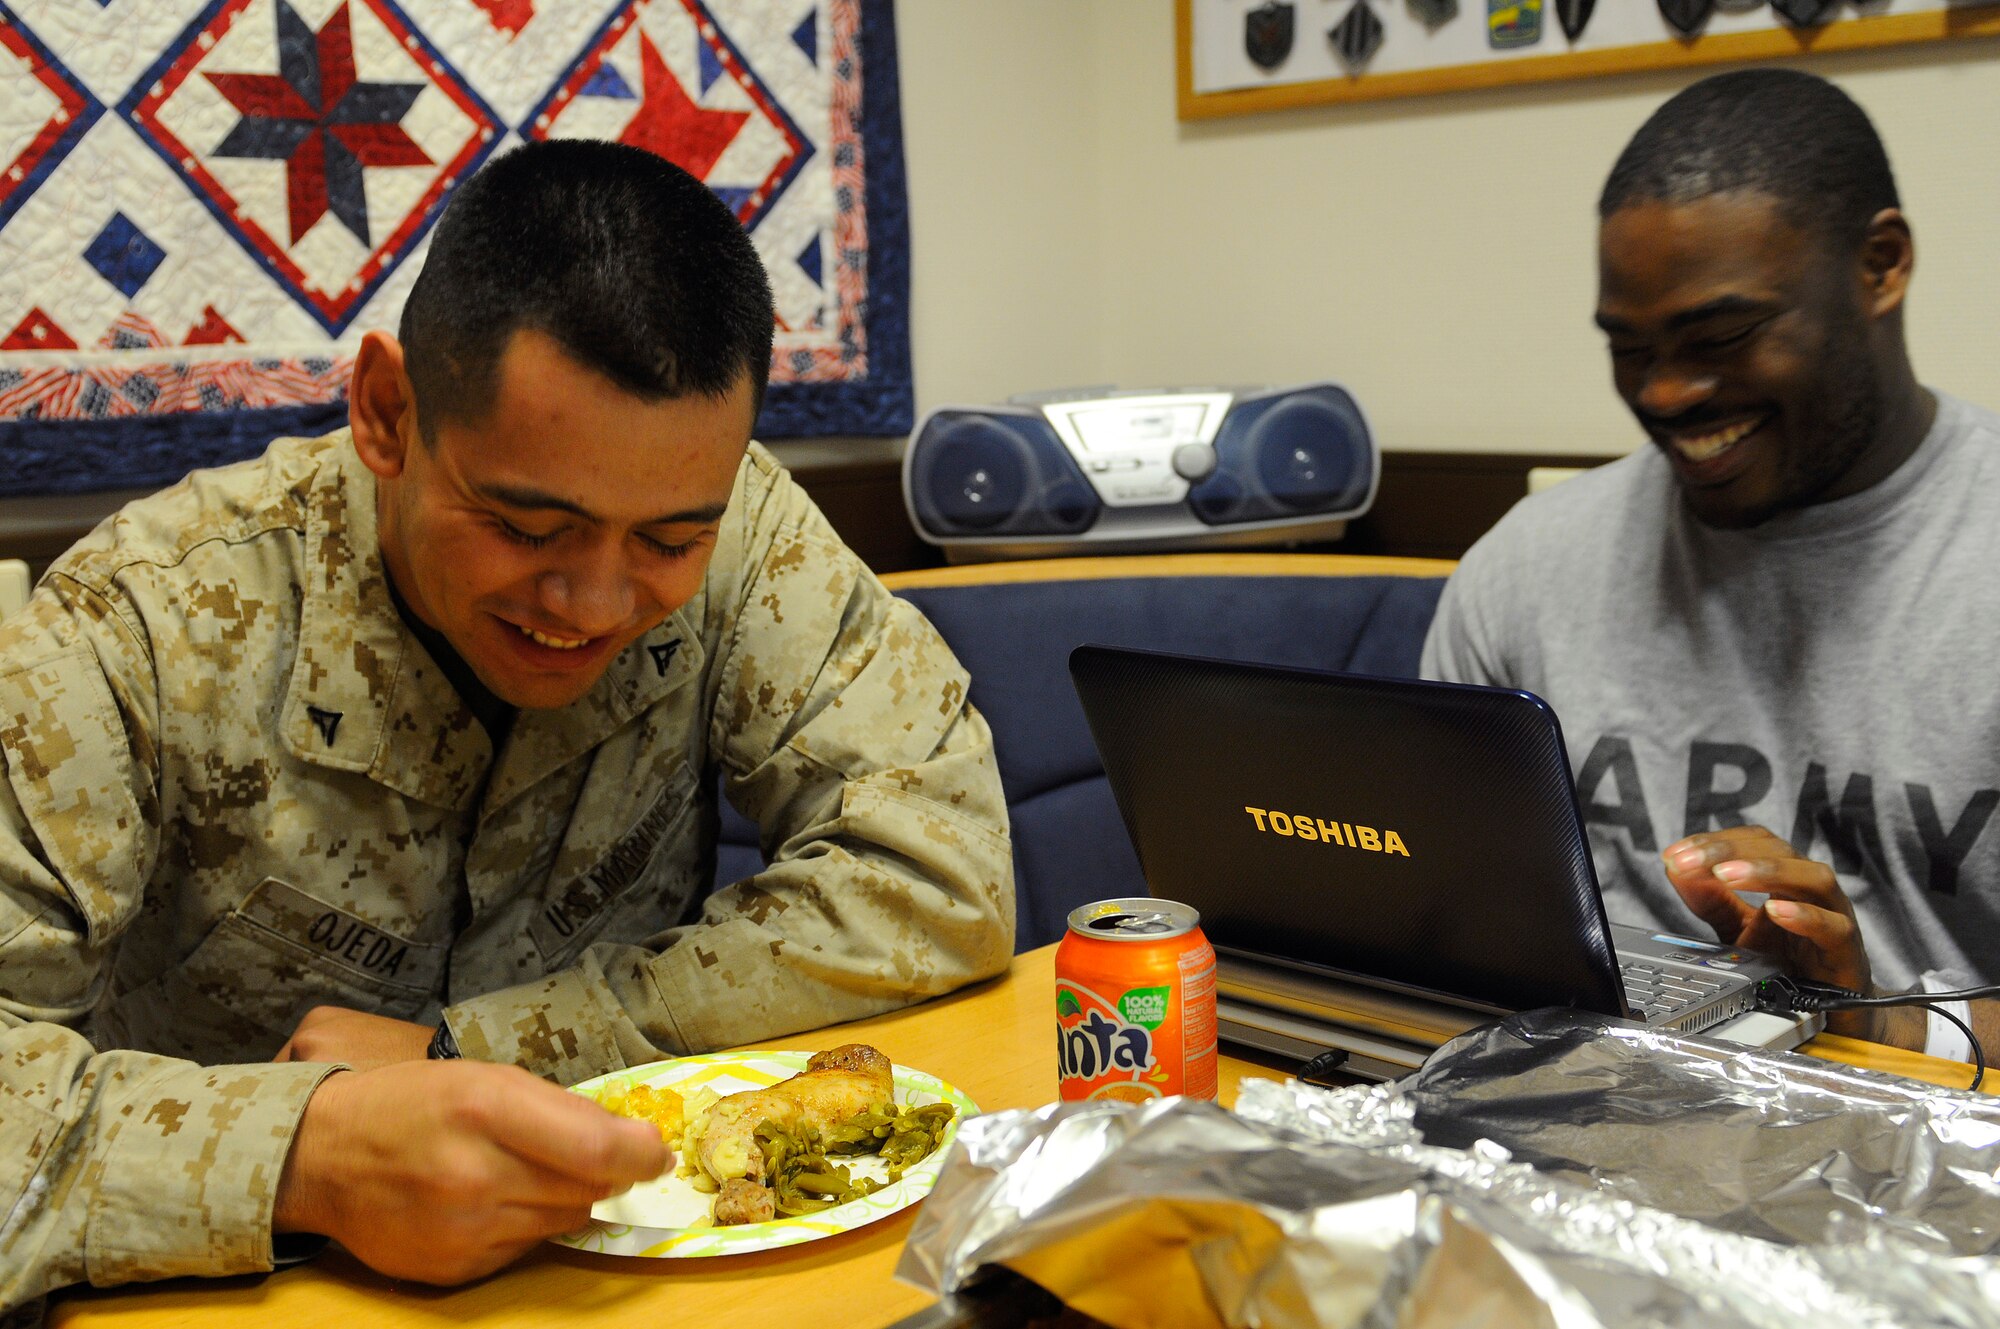 U.S. Marine Corps Lance Cpl. Octavio Ojeda, radio operator, 4th Battalion Landing Team, Camp Pendleton, California and Army Pvt. 1st Class David Bradley, chemical speculator, 343rd Medical Company based out of Richmond, V.A., eat at the Contingency Aeromedical Staging Facility (CASF) on Ramstein Air Base, Germany, Feb. 25, 2010. The servicemembers sat down for a home cooked meal made by 'Mama' West during their stay at the CASF. (U.S. Air Force photo by Airman 1st Class Brea Miller)